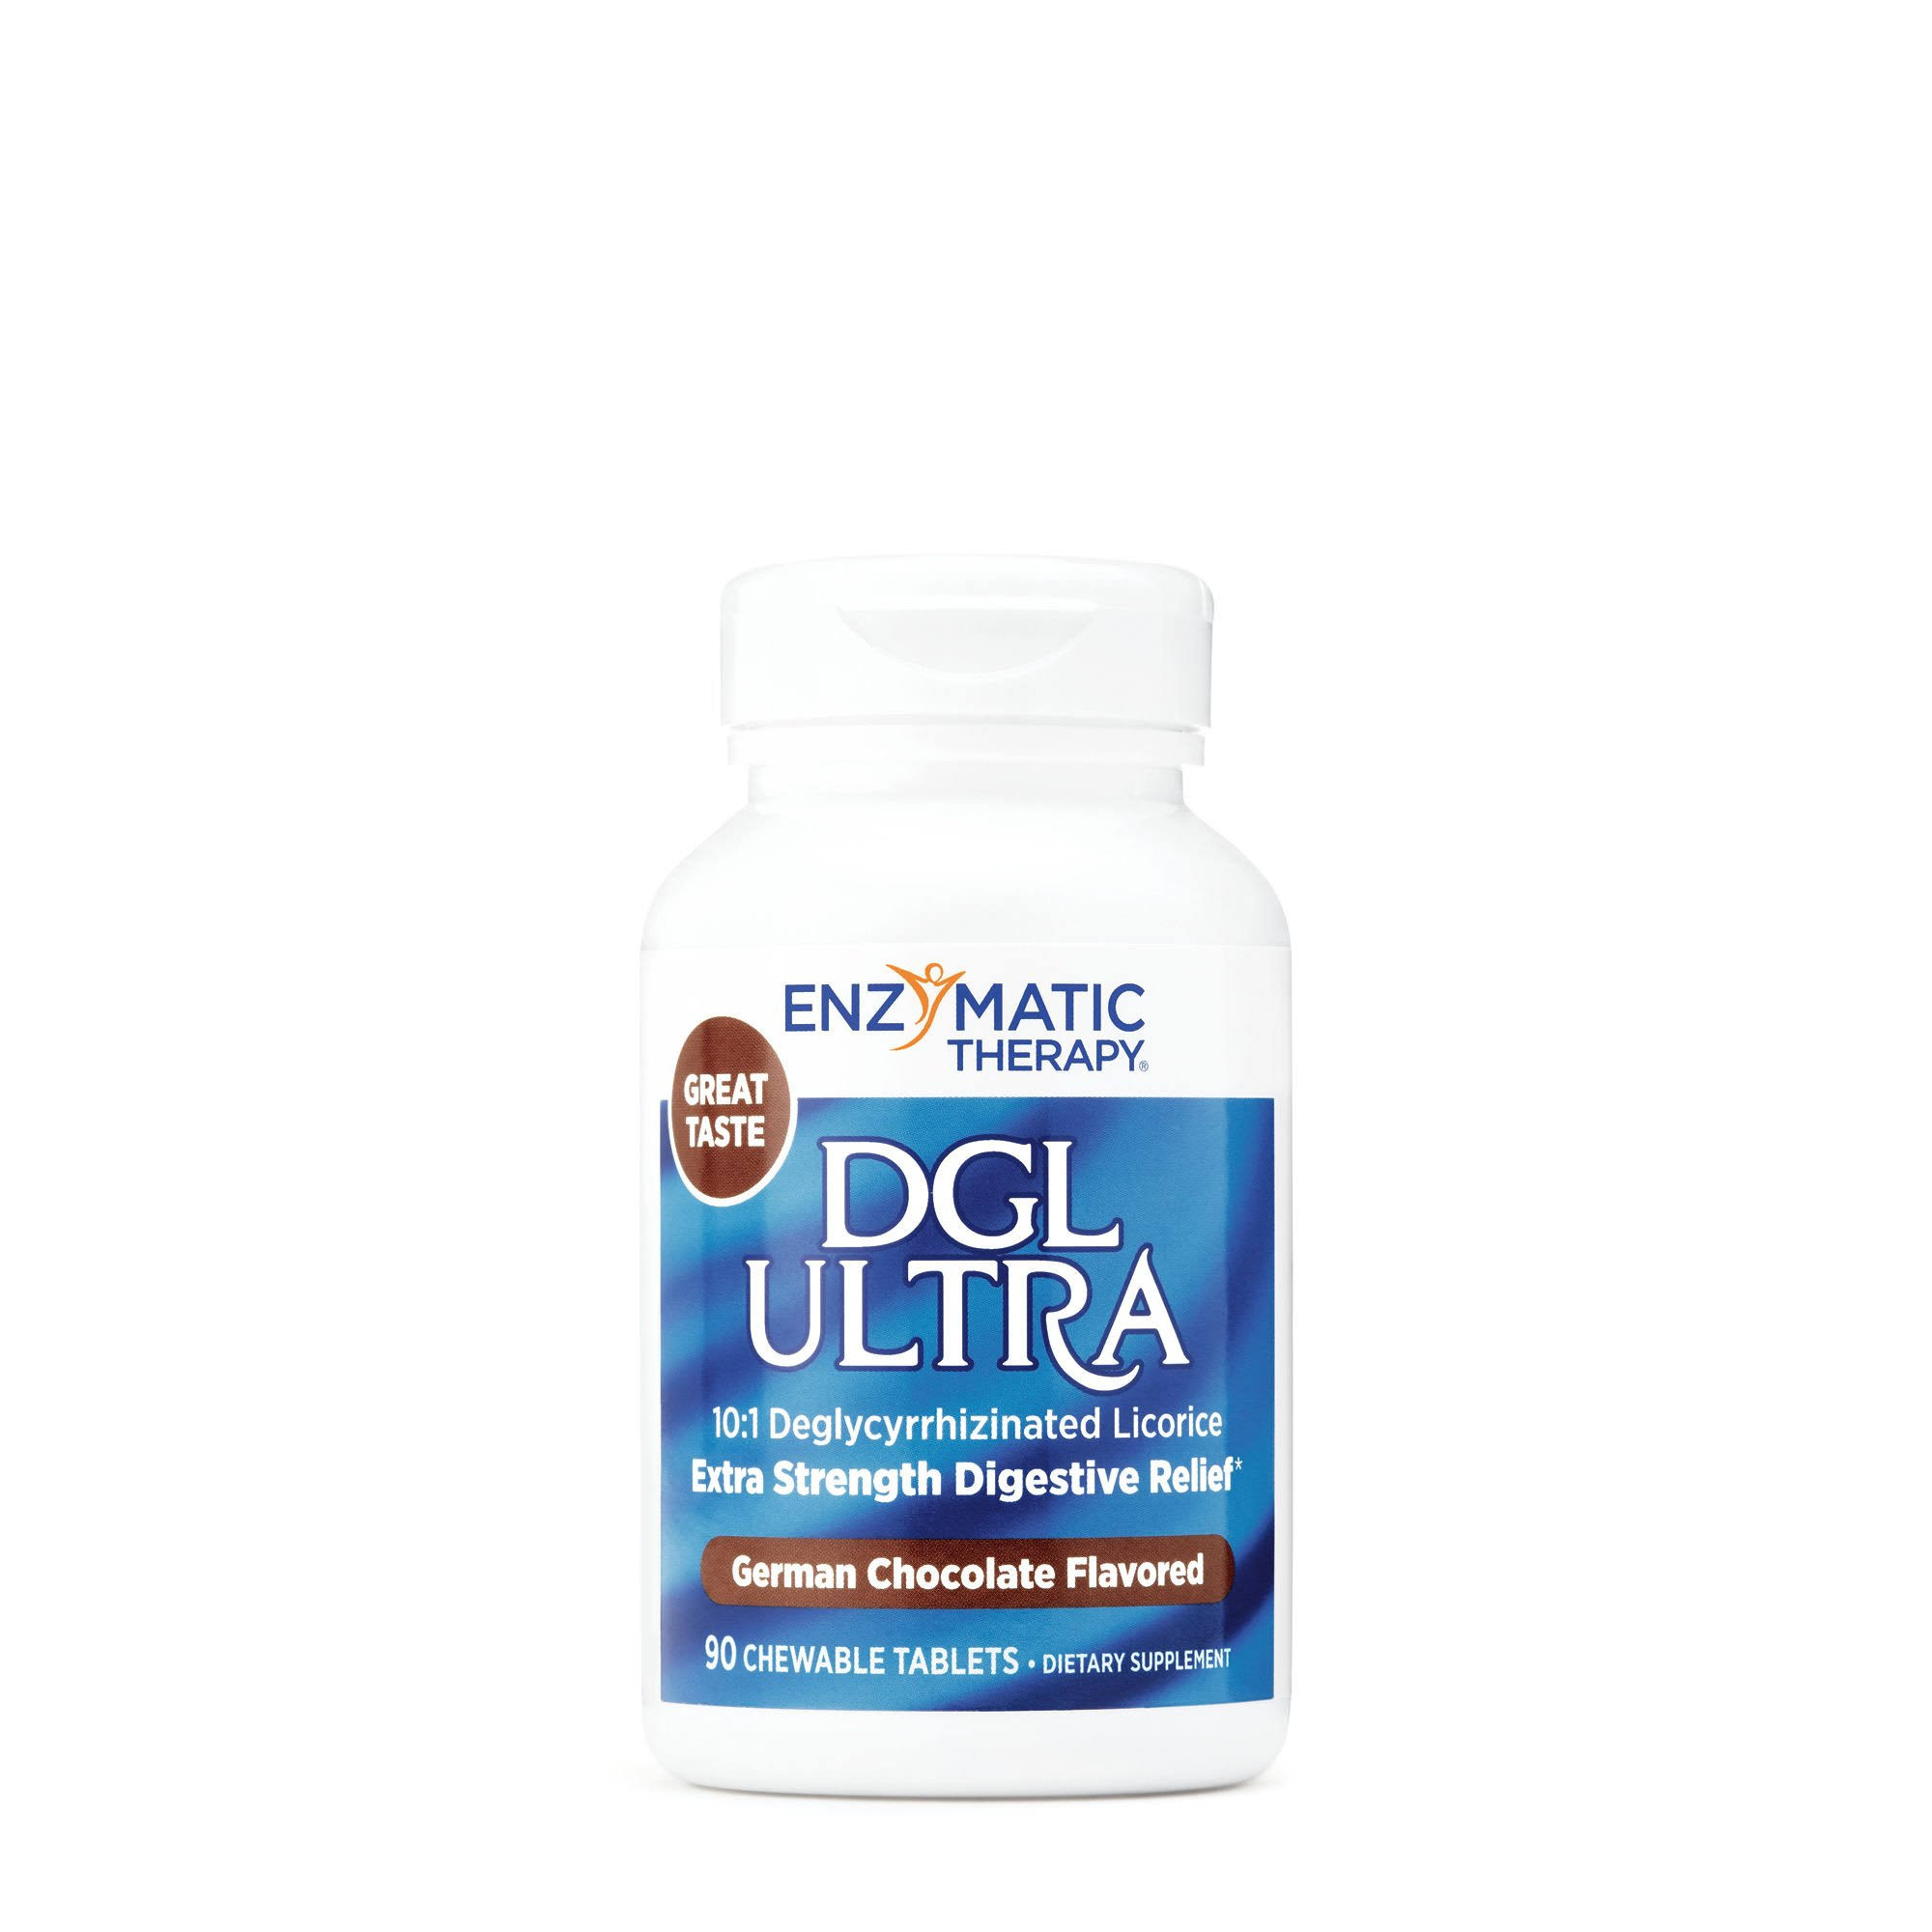 Enzymatic Therapy DGL Ultra German Chocolate 90 Chewable Tablets